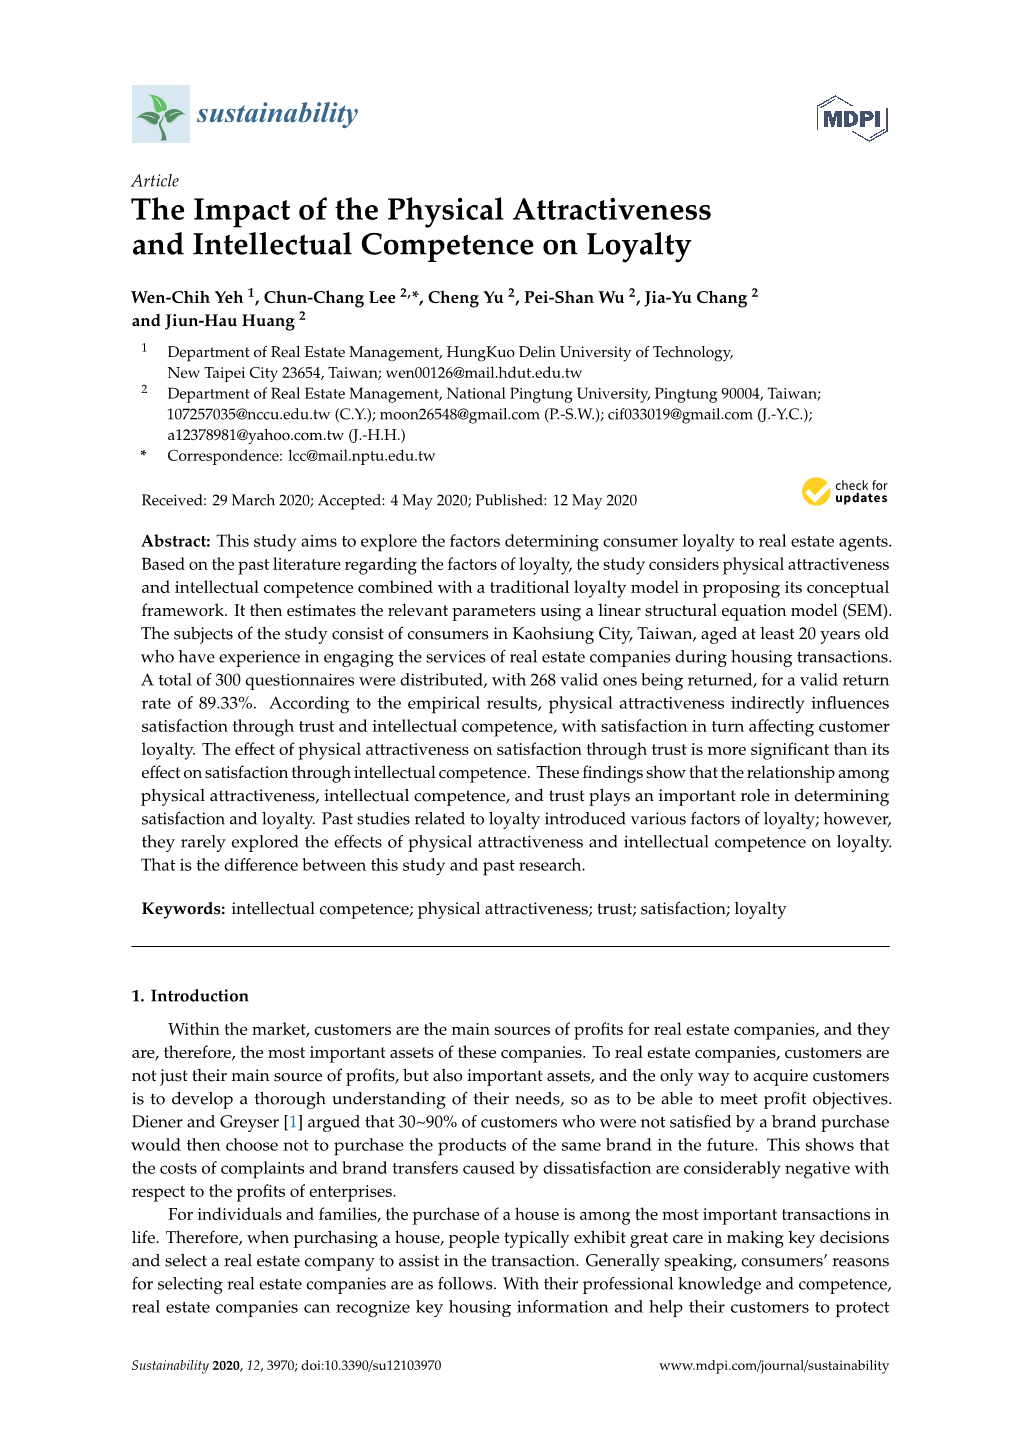 The Impact of the Physical Attractiveness and Intellectual Competence on Loyalty